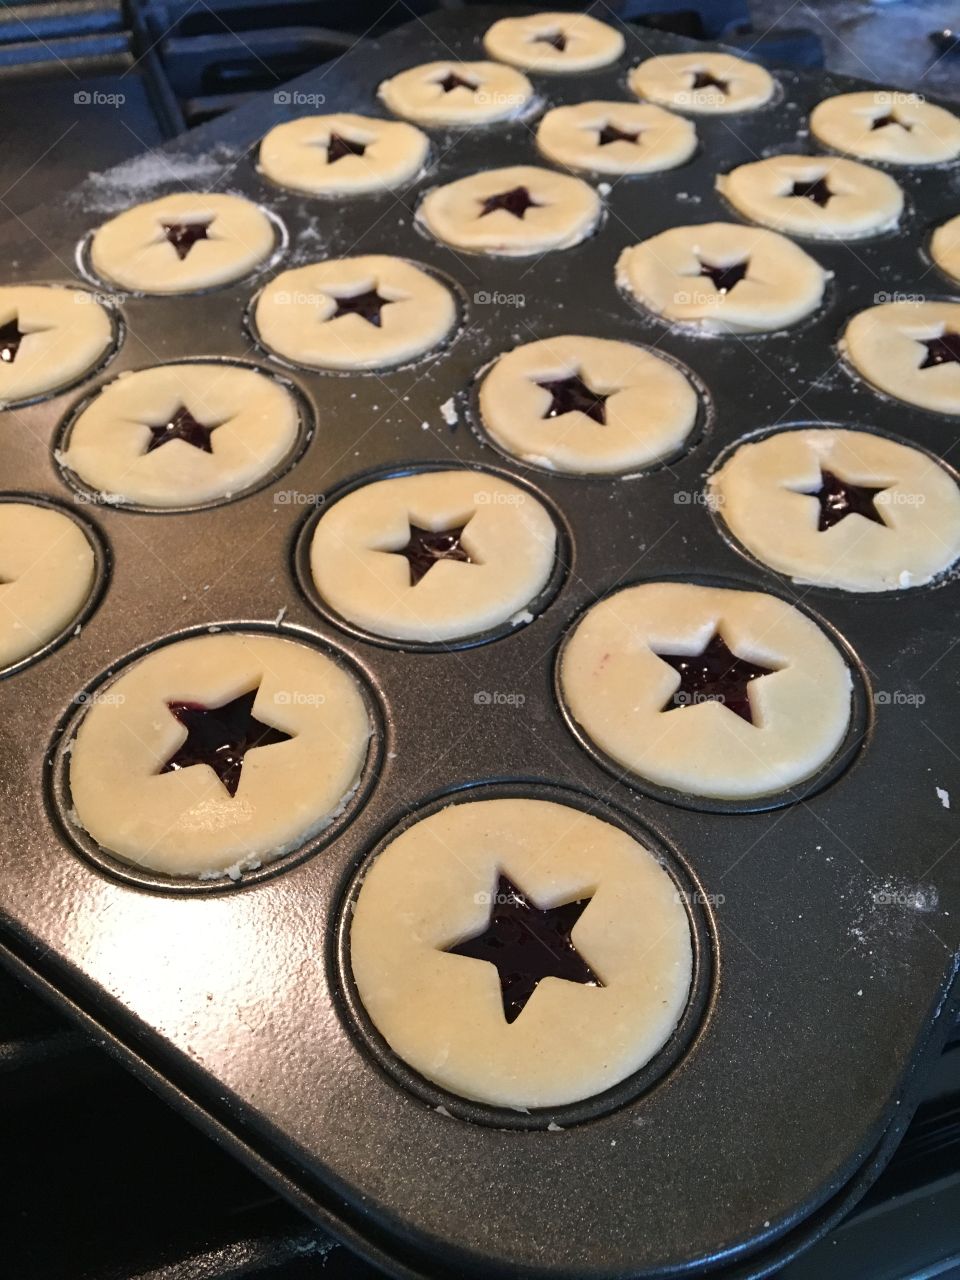 Mini Blueberry Pies are ready to go in the oven! Topped star shaped cut-outs they are reminiscent of barn stars. 